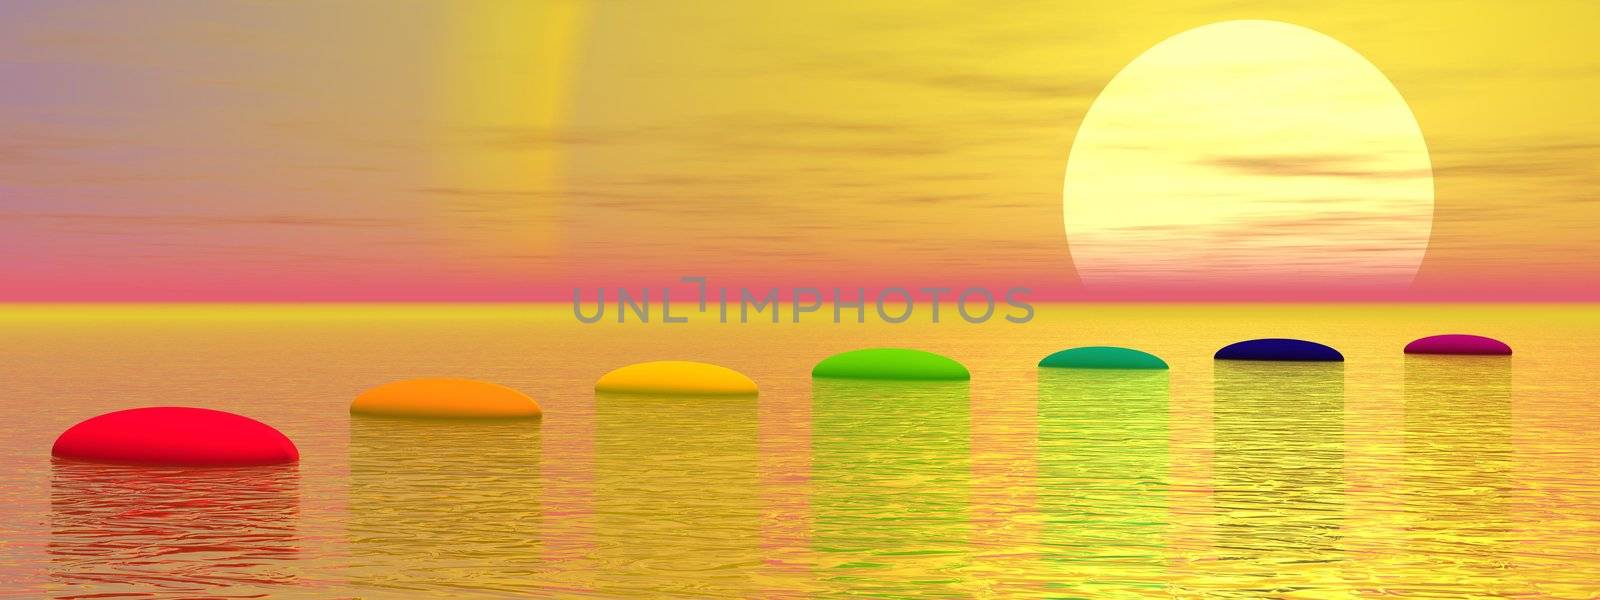 Seven steps with chakra colors over ocean leading to the sun by sunset